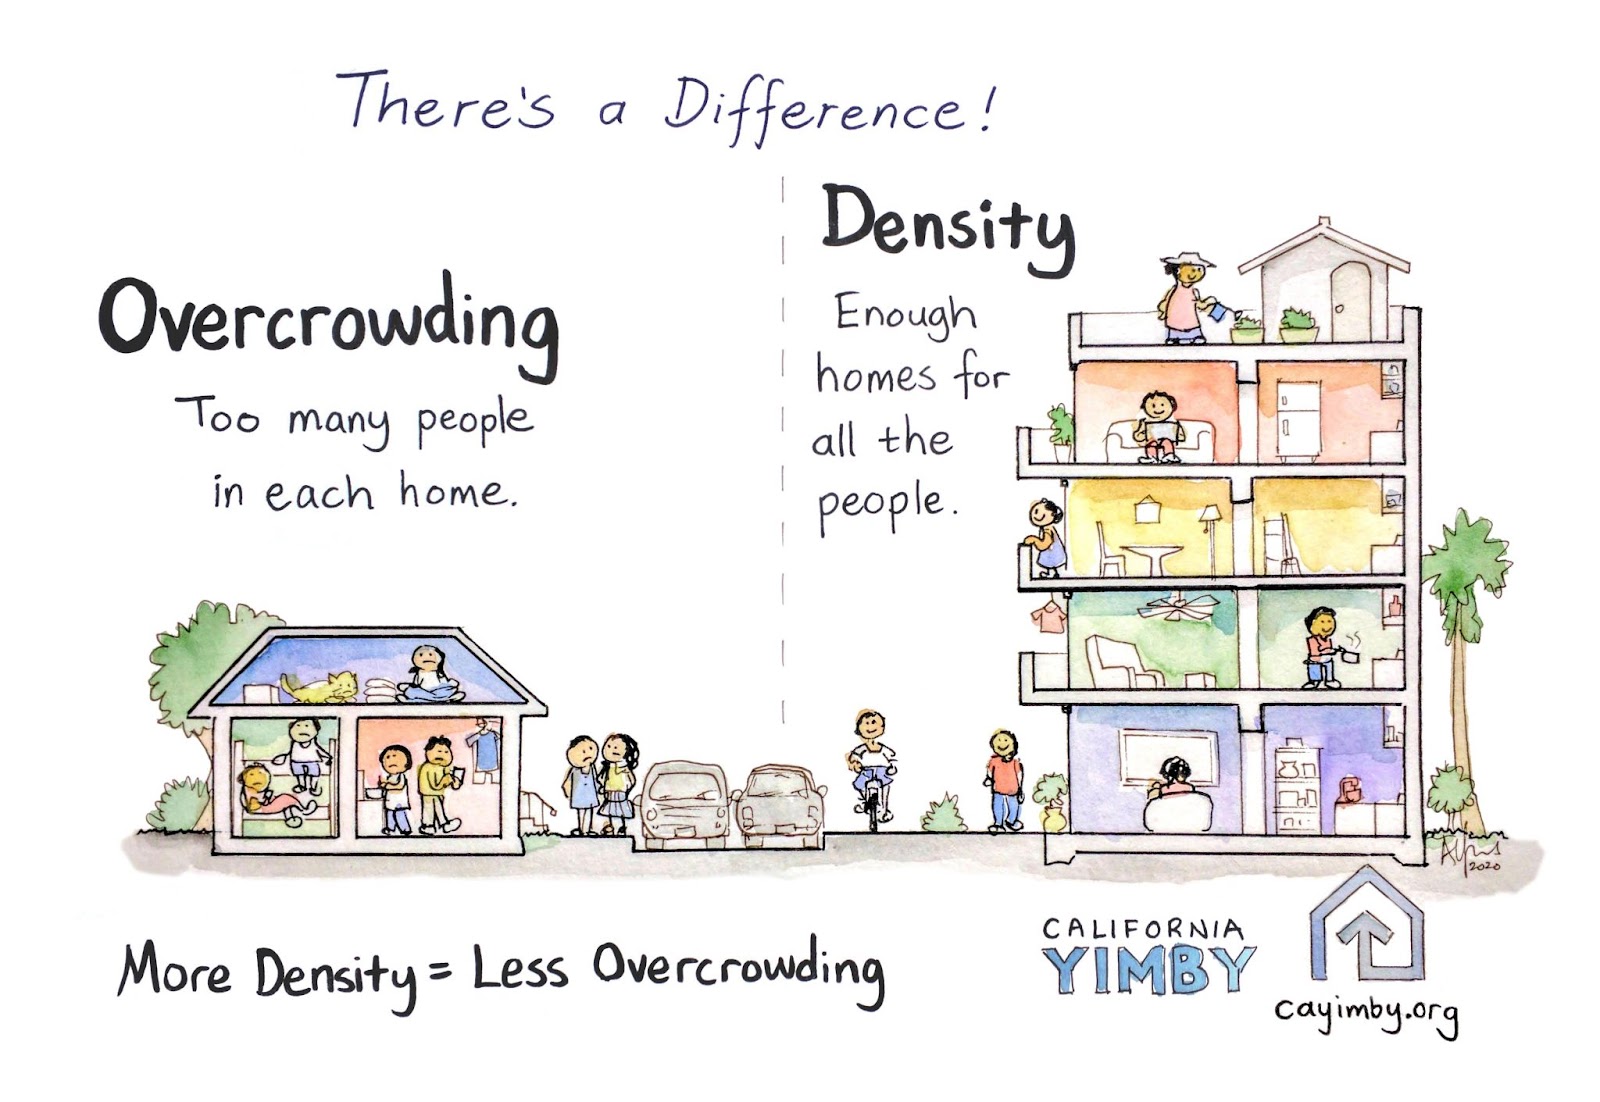 California YIMBY: the difference between overcrowding and density